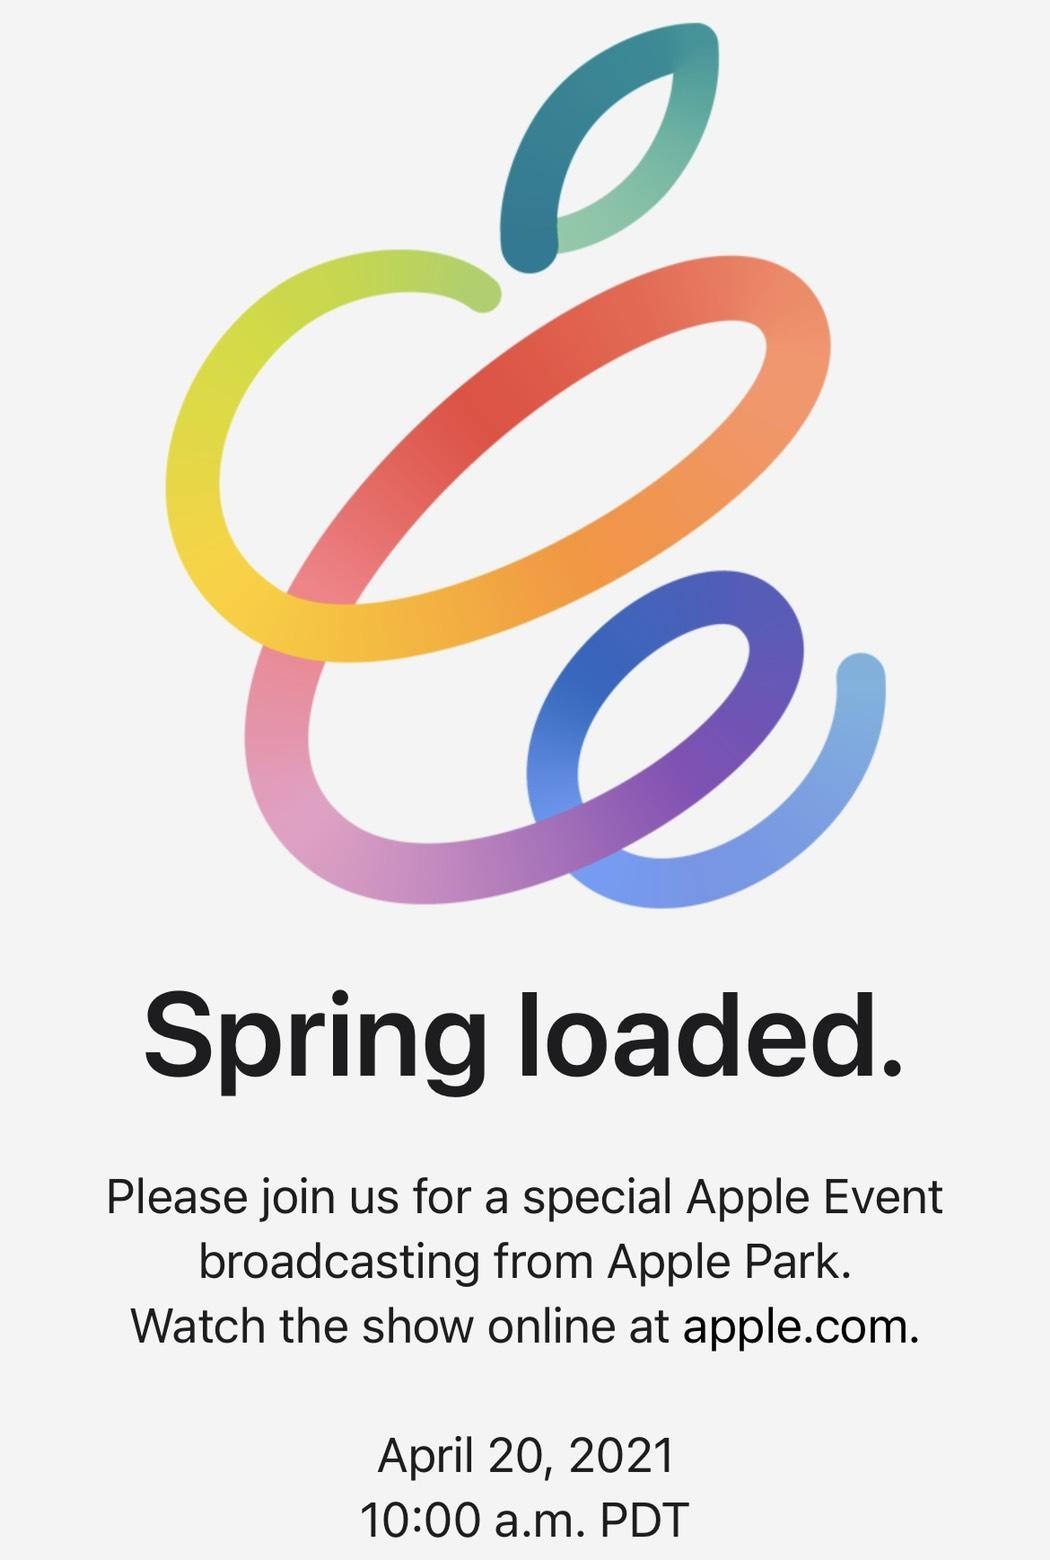 What to expect at Apple's April 2021 event